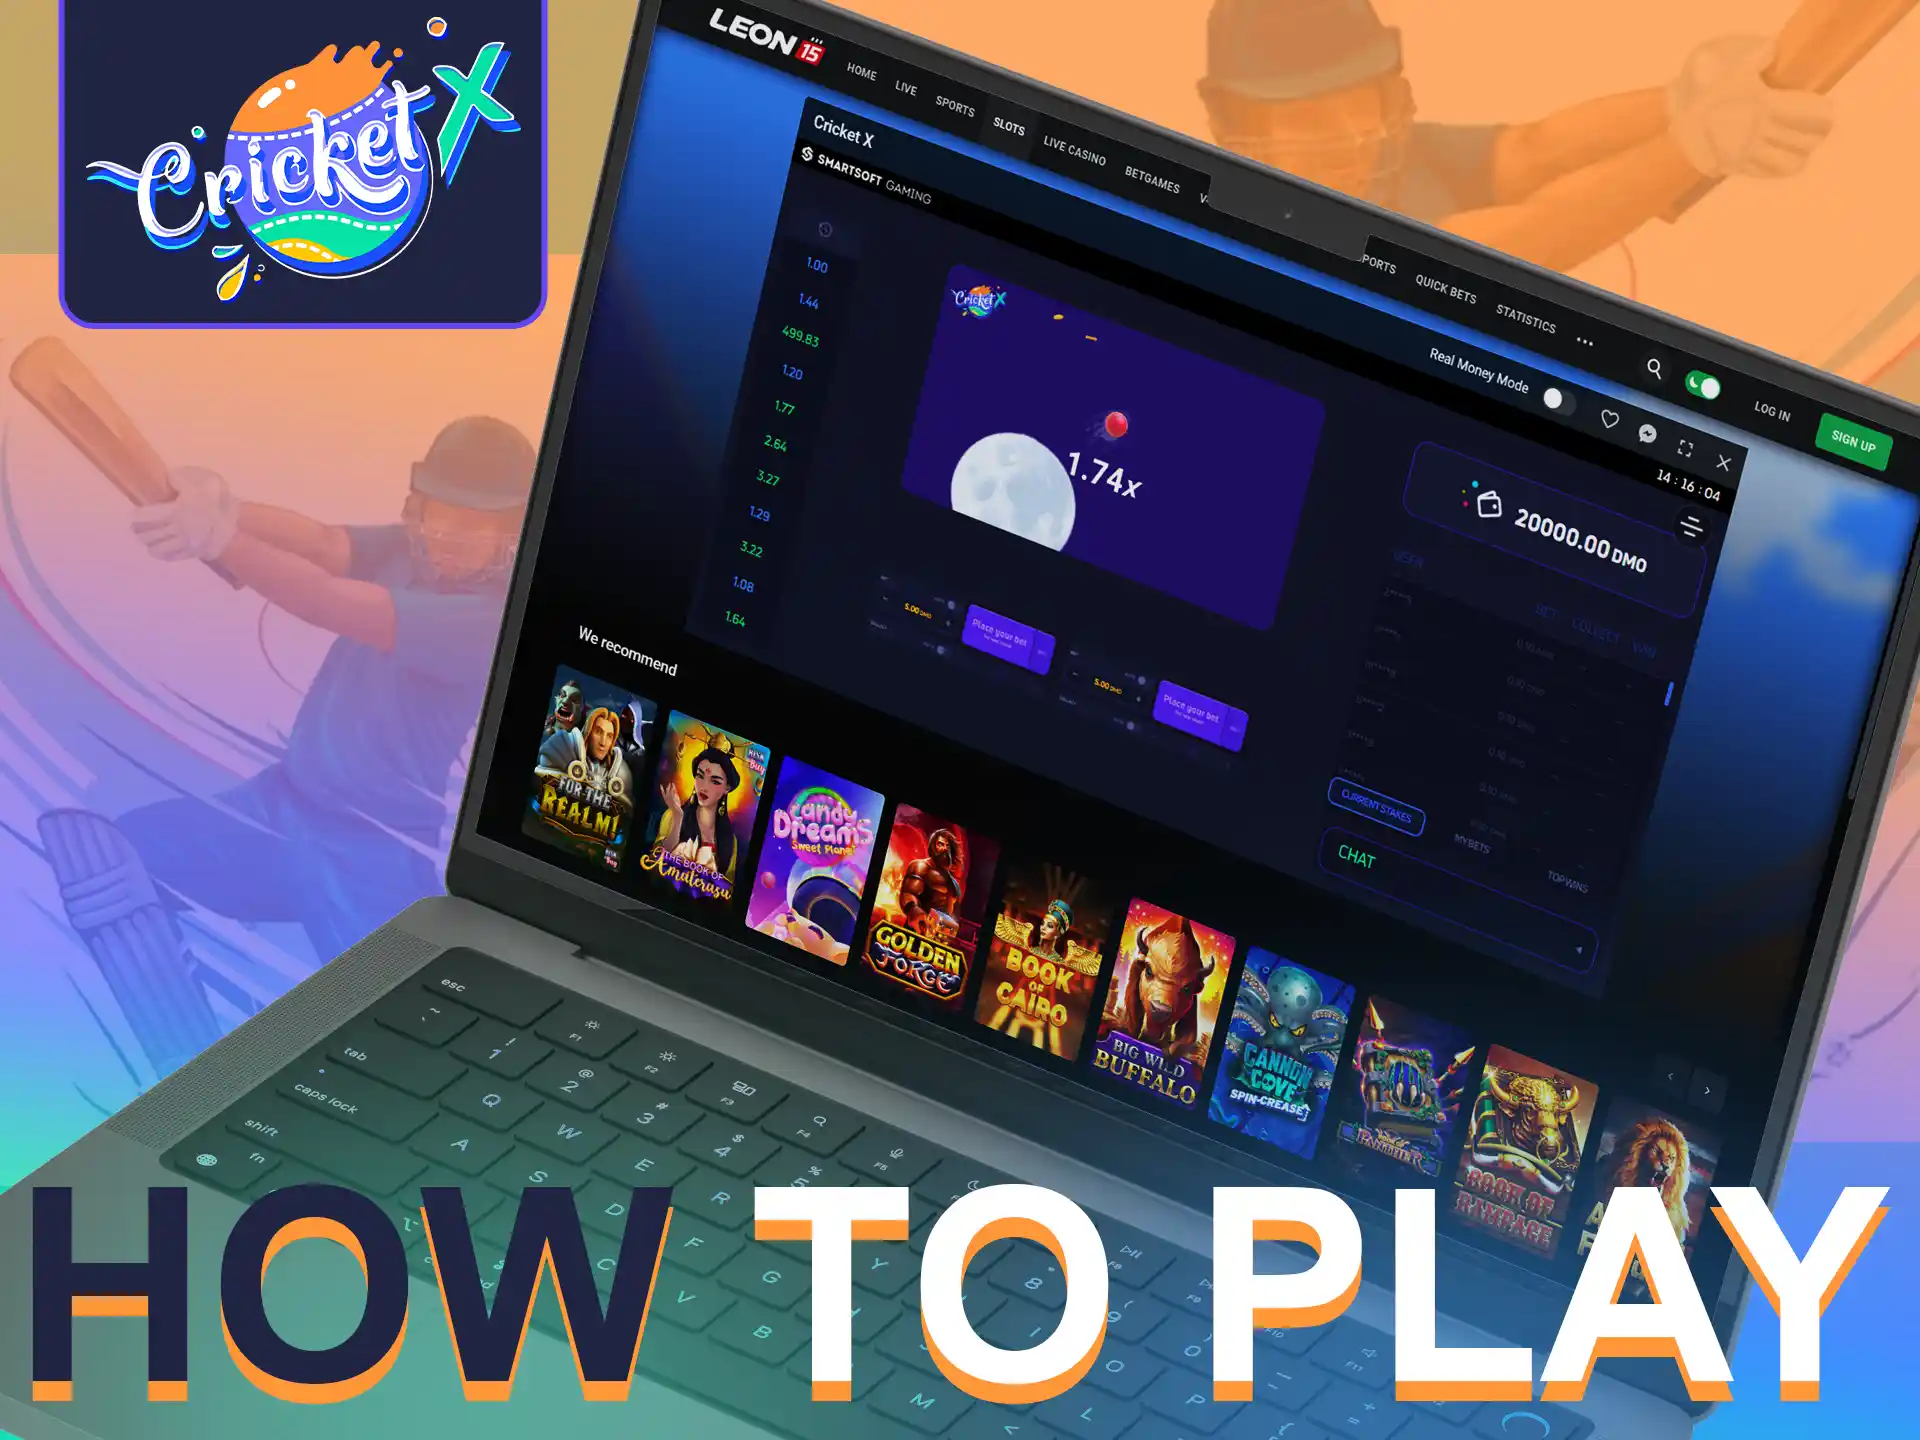 Cricket X is a crash game with a high multiplier that applies to your winnings.